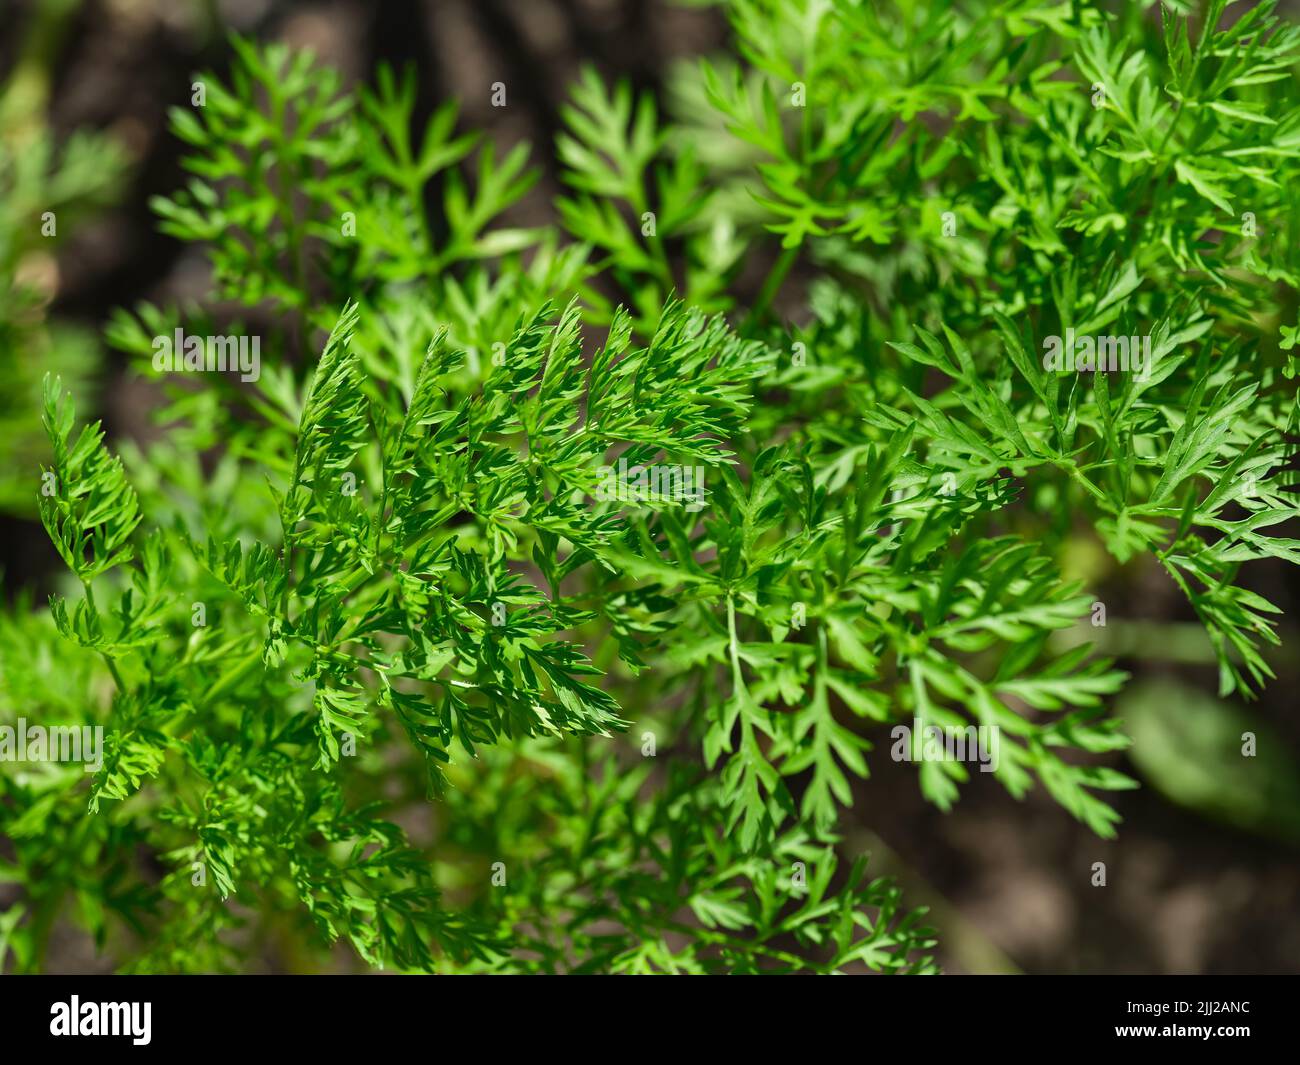 A close-up shot of green carrot tops in nature Stock Photo